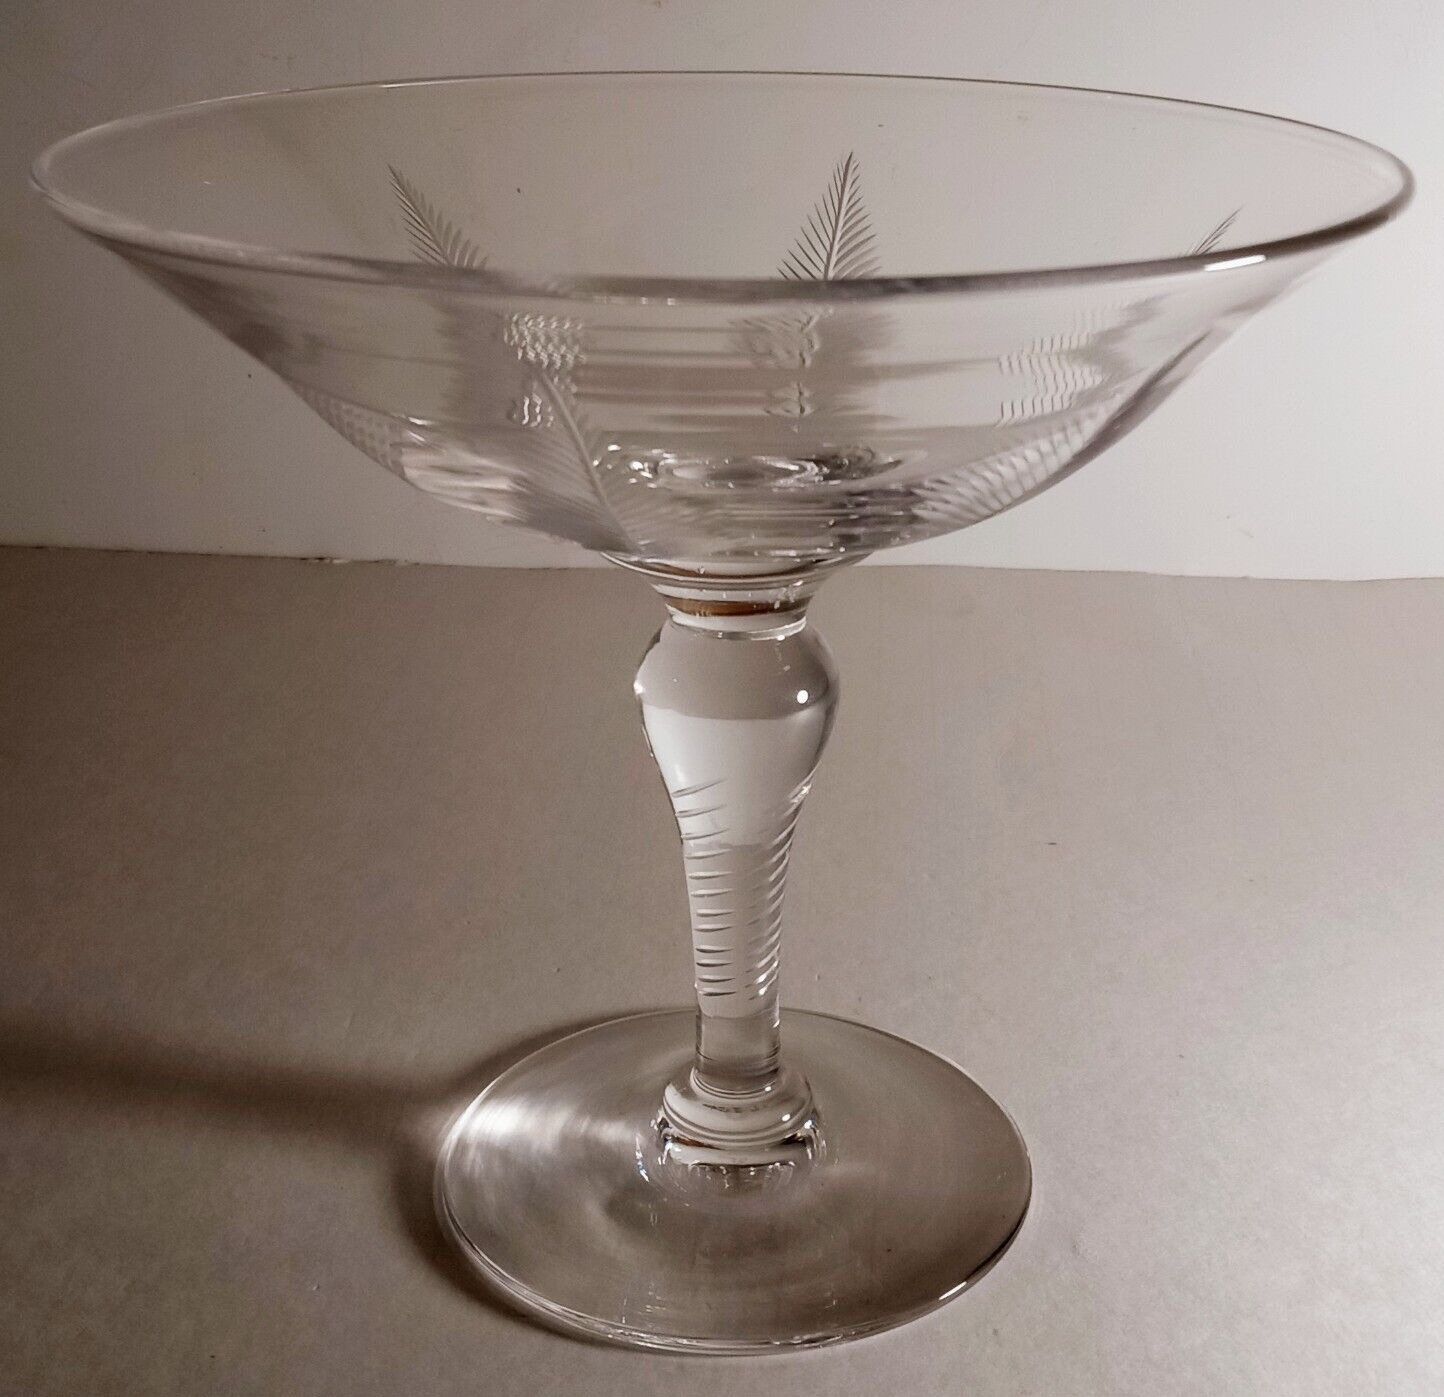 STUART Crystal Glass Woodchester Fern Compote Tazza Rare Piece England Vintage